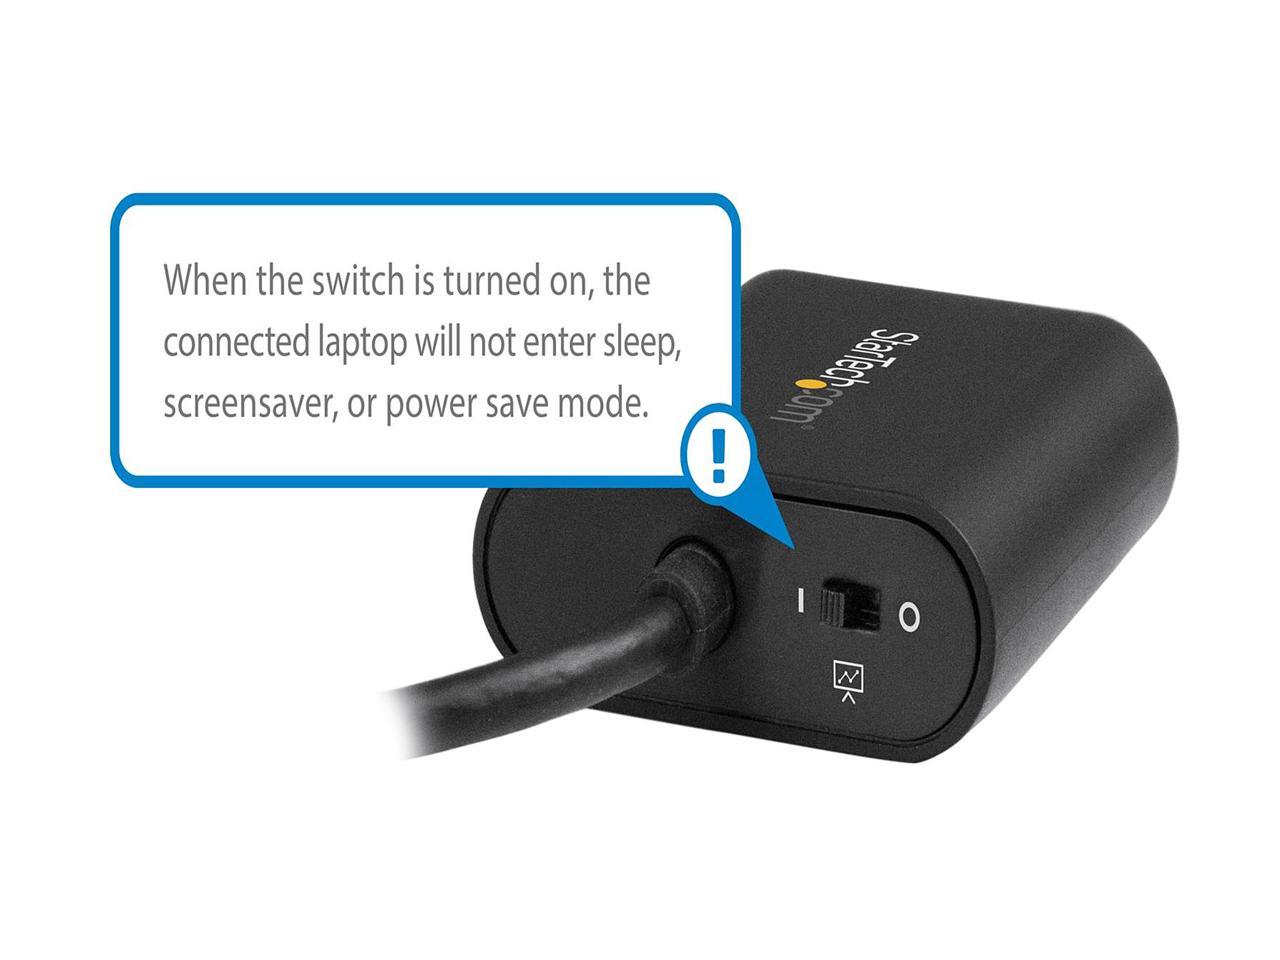 StarTech CDP2VGASA USB-C to HDMI Adapter - With Stay Awake - Presentation Mode - USB C Adapter - USB-C to VGA Projector Adapter